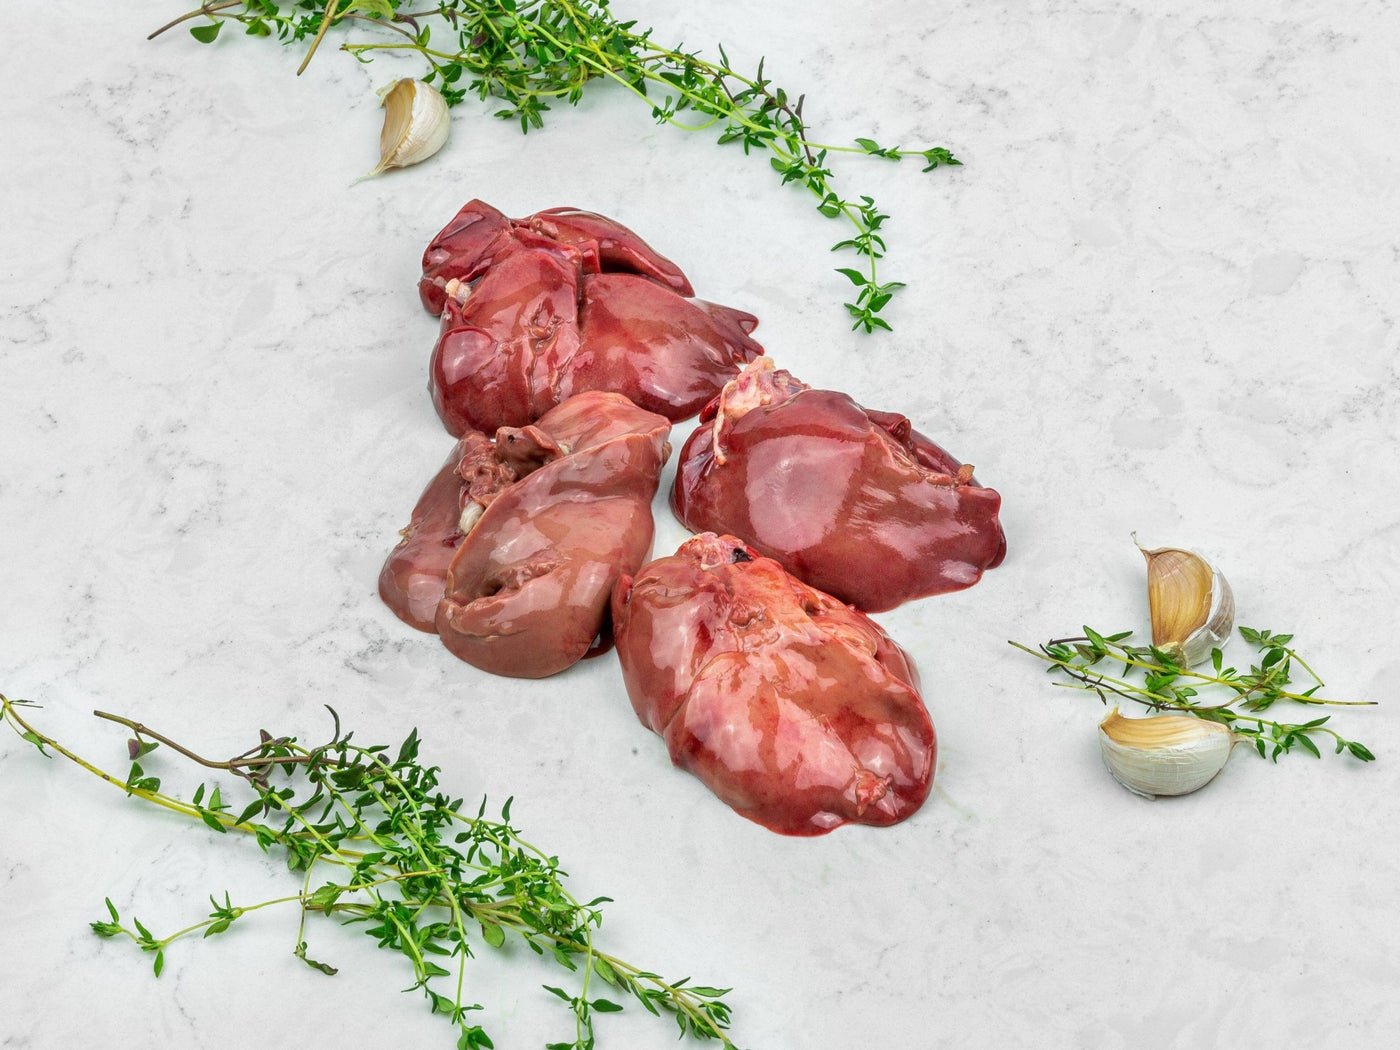 Herb Fed Chicken Livers - Chicken - Thomas Joseph Butchery - Ethical Dry-Aged Meat The Best Steak UK Thomas Joseph Butchery